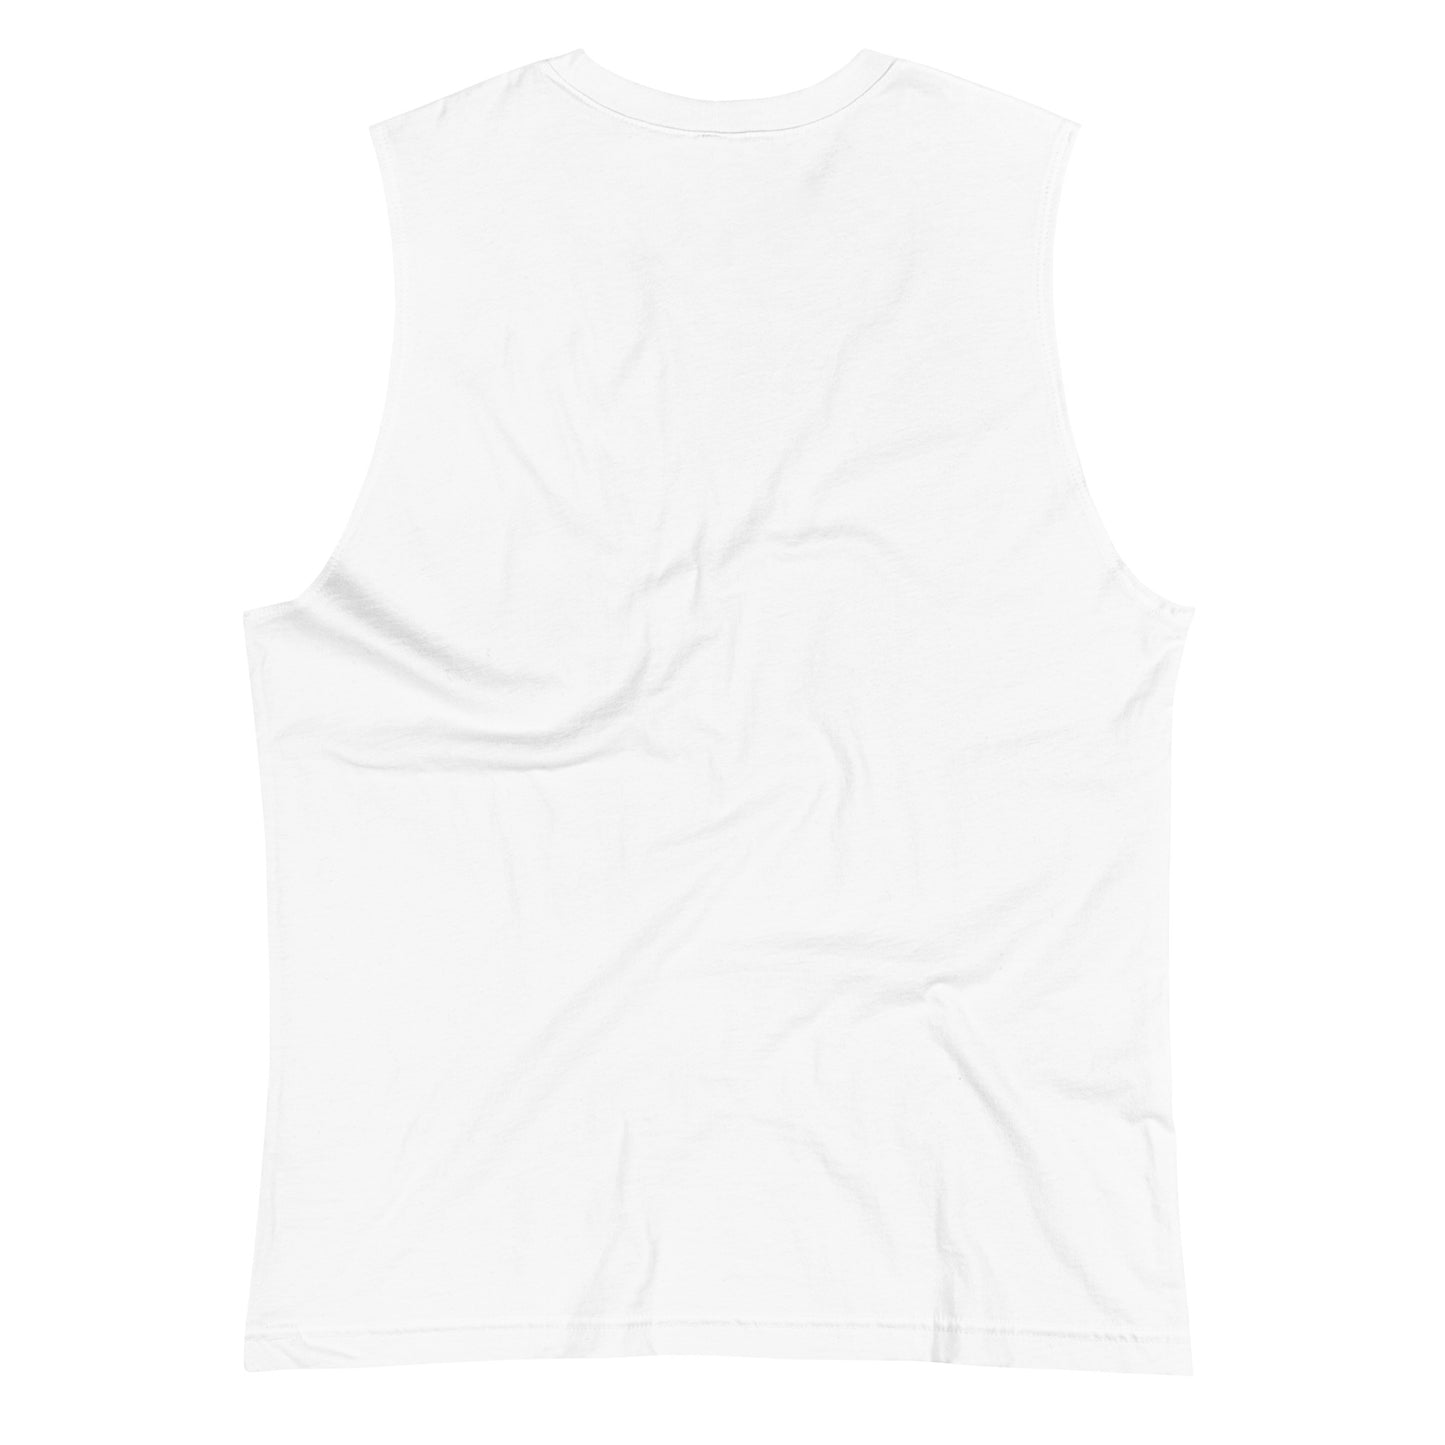 VICTORIOUS Muscle Shirt